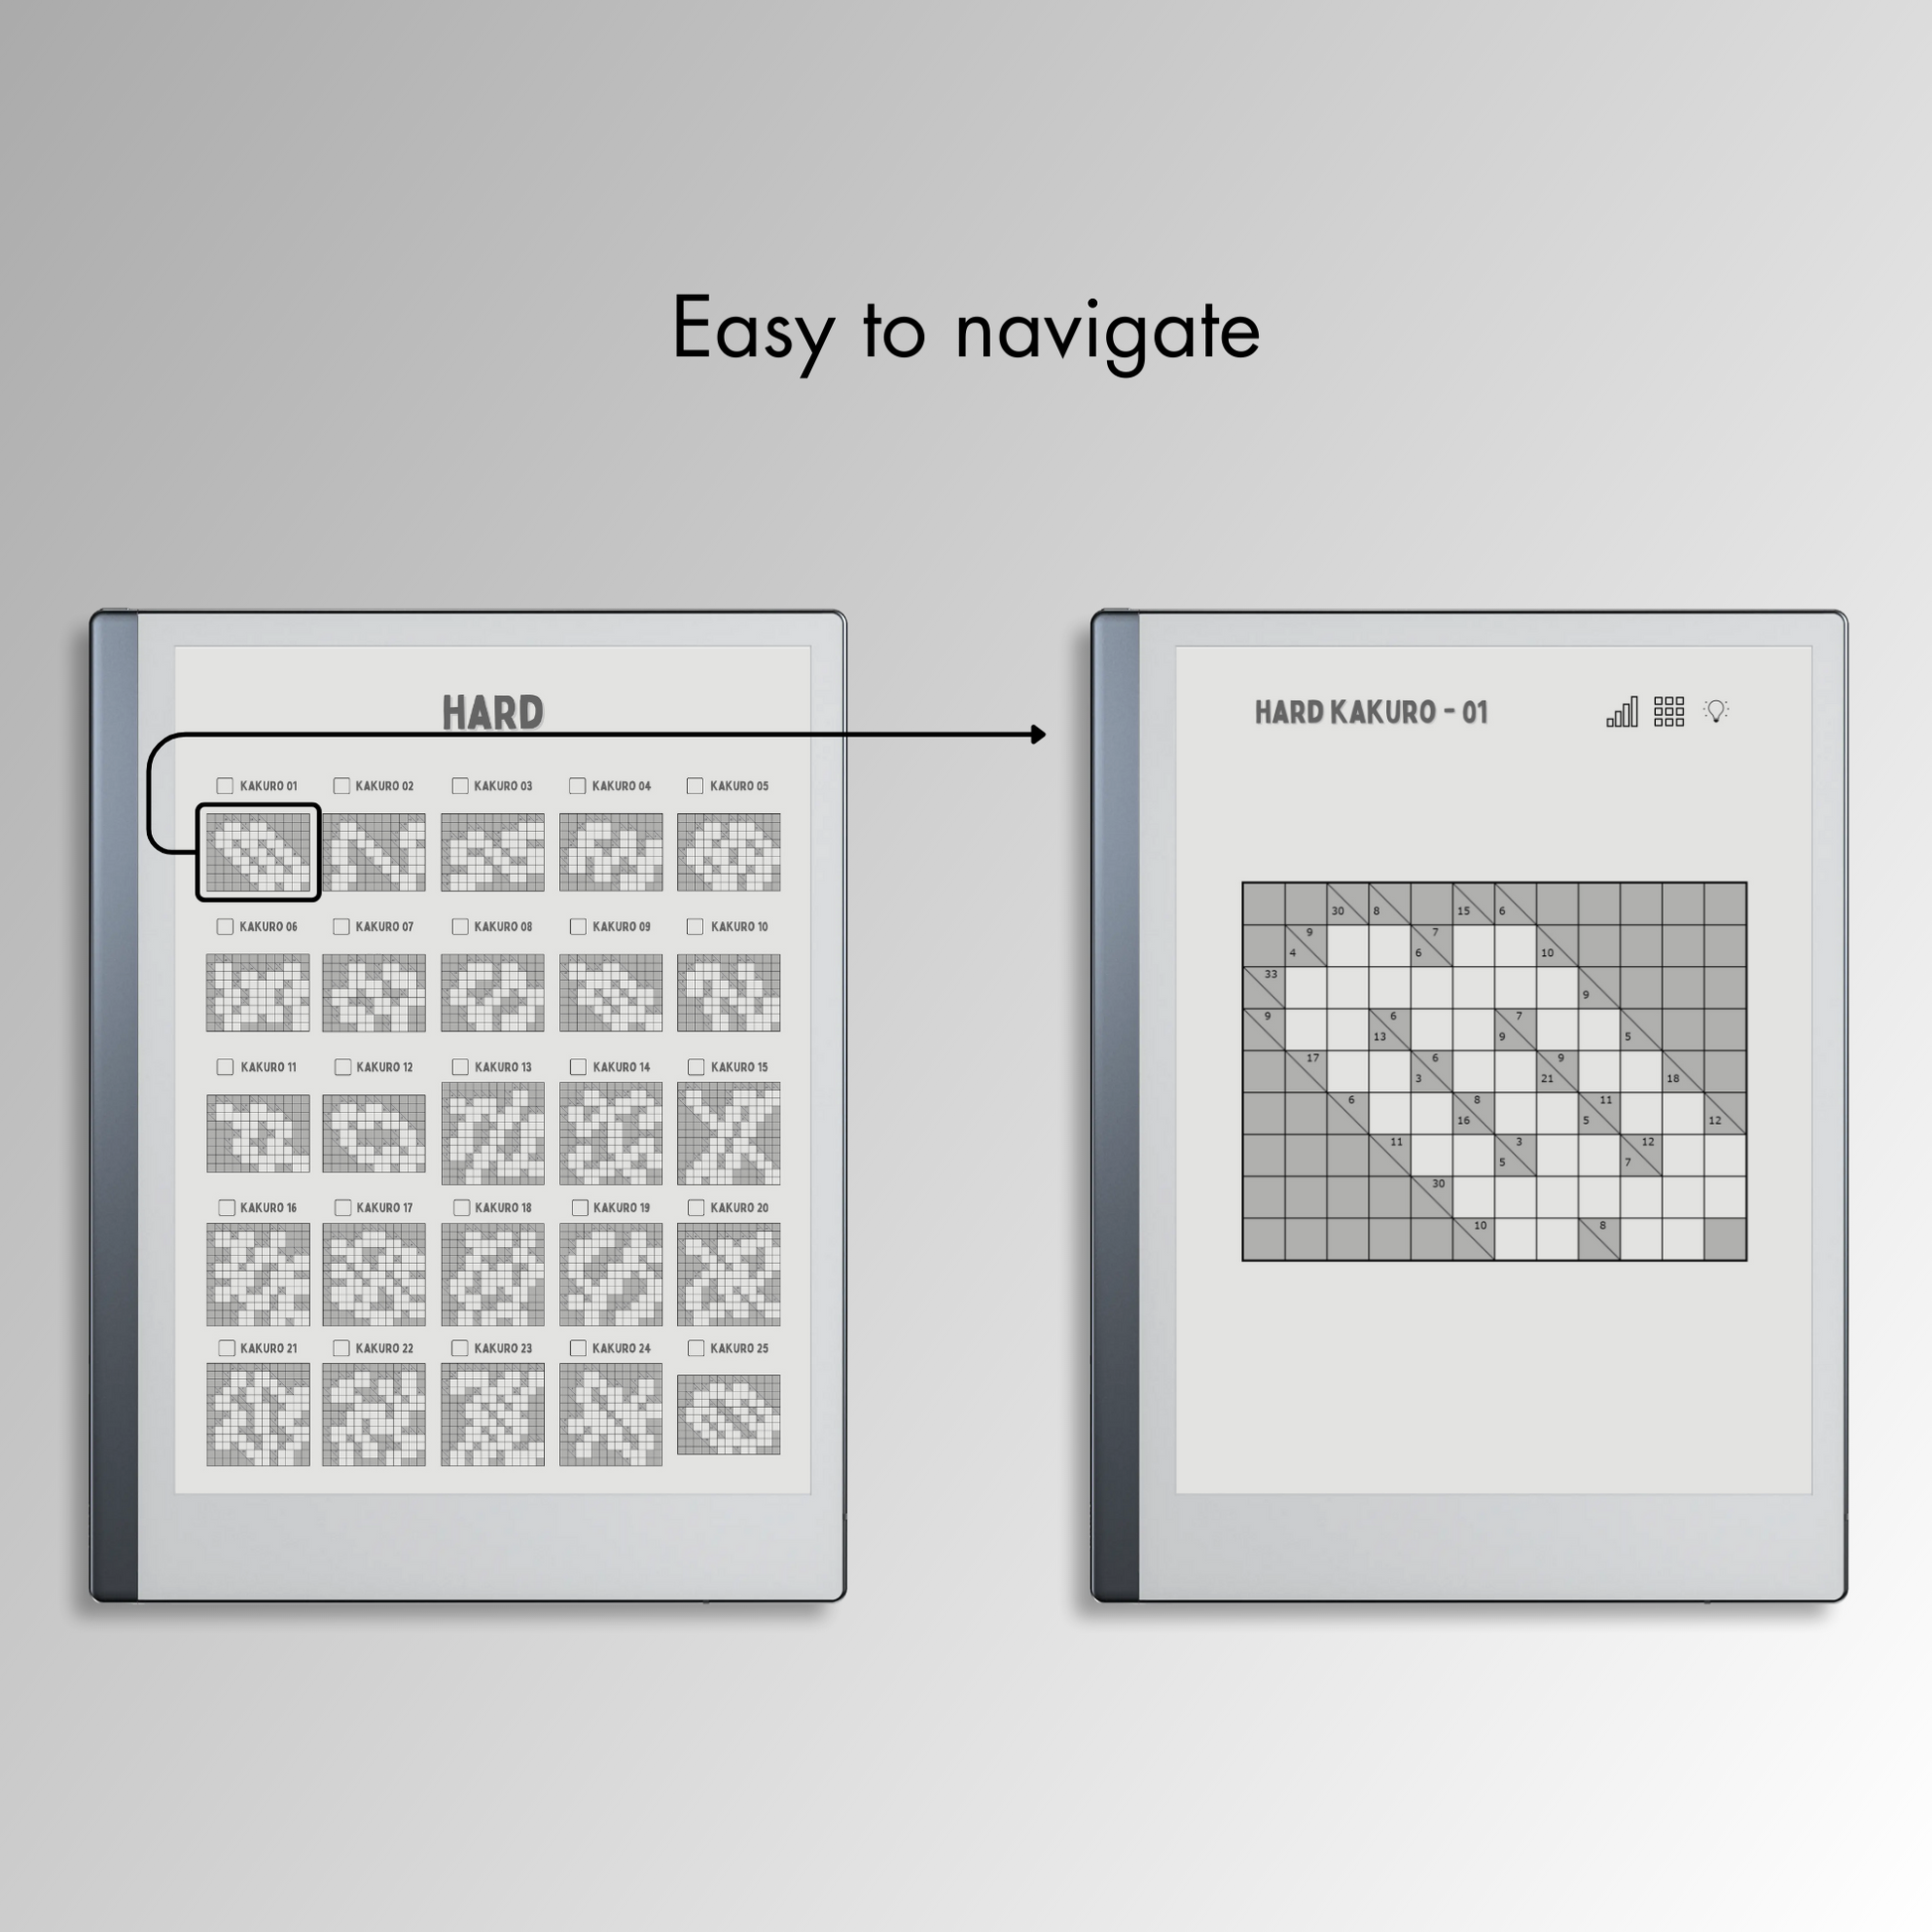 Remarkable 2 Kakuro Puzzles with easy navigations.